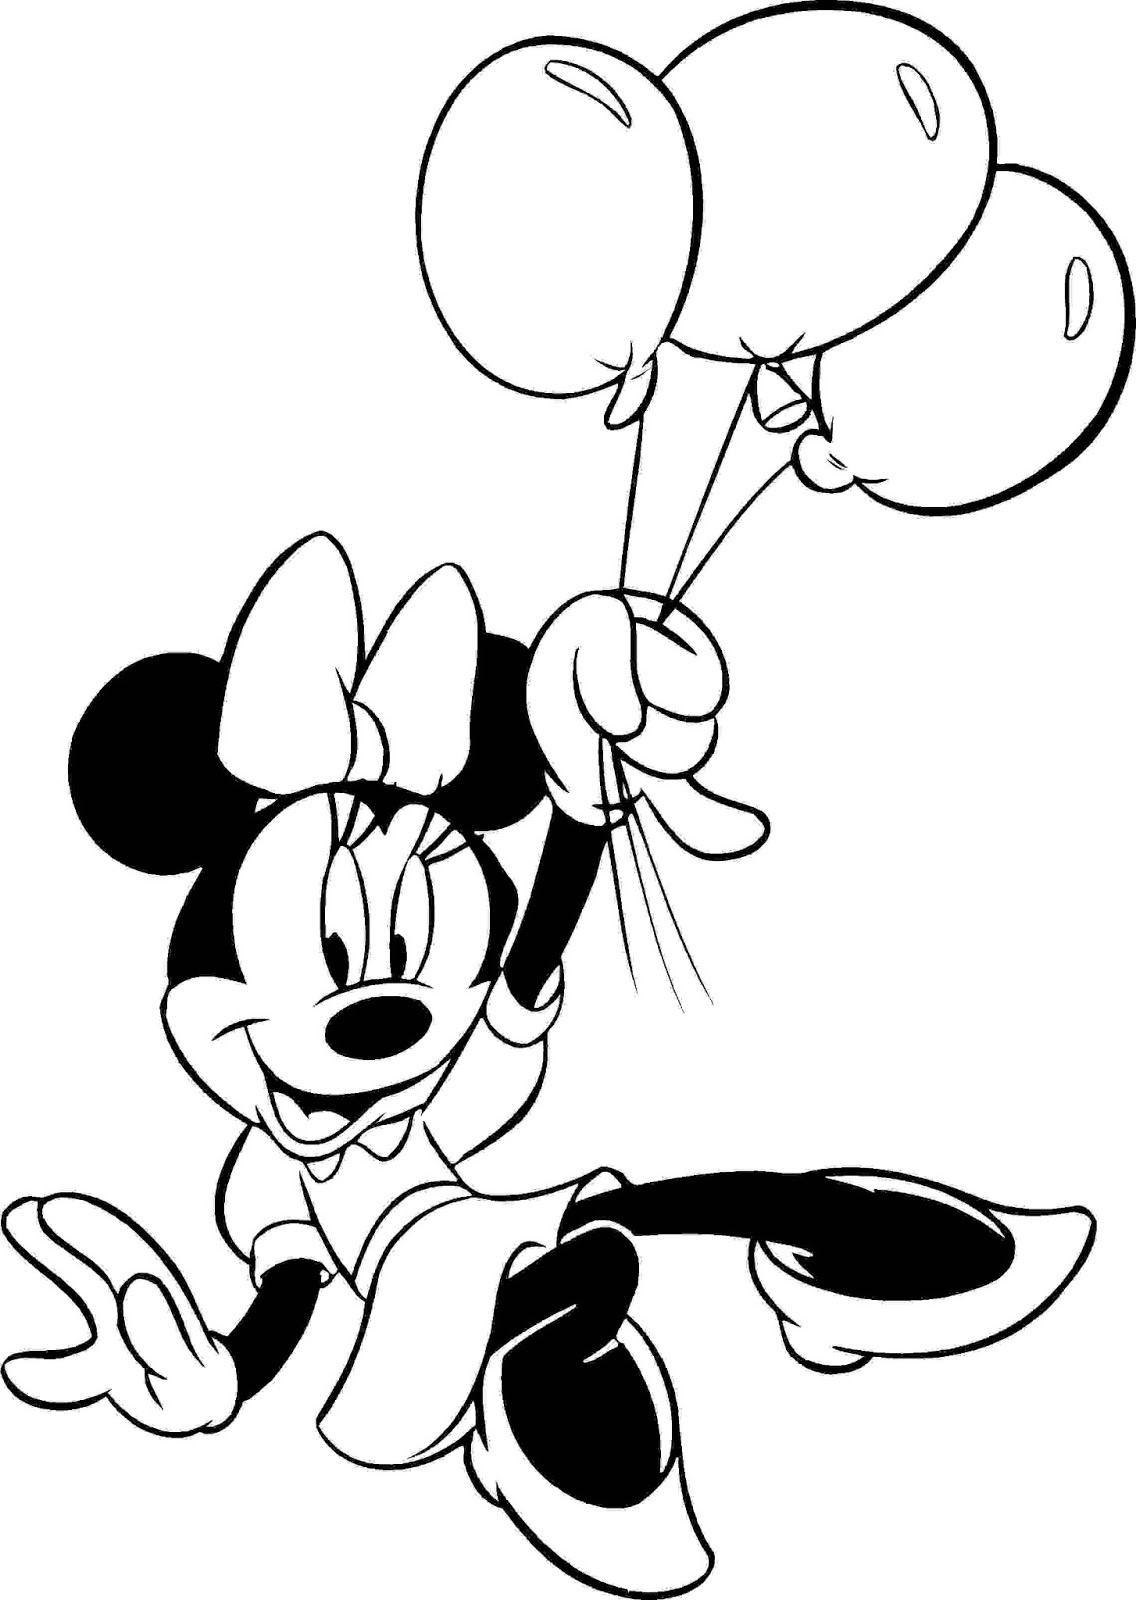 Minnie Mouse Printable Coloring Pages
 Free Minnie Coloring Pages To Color Coloring Pages